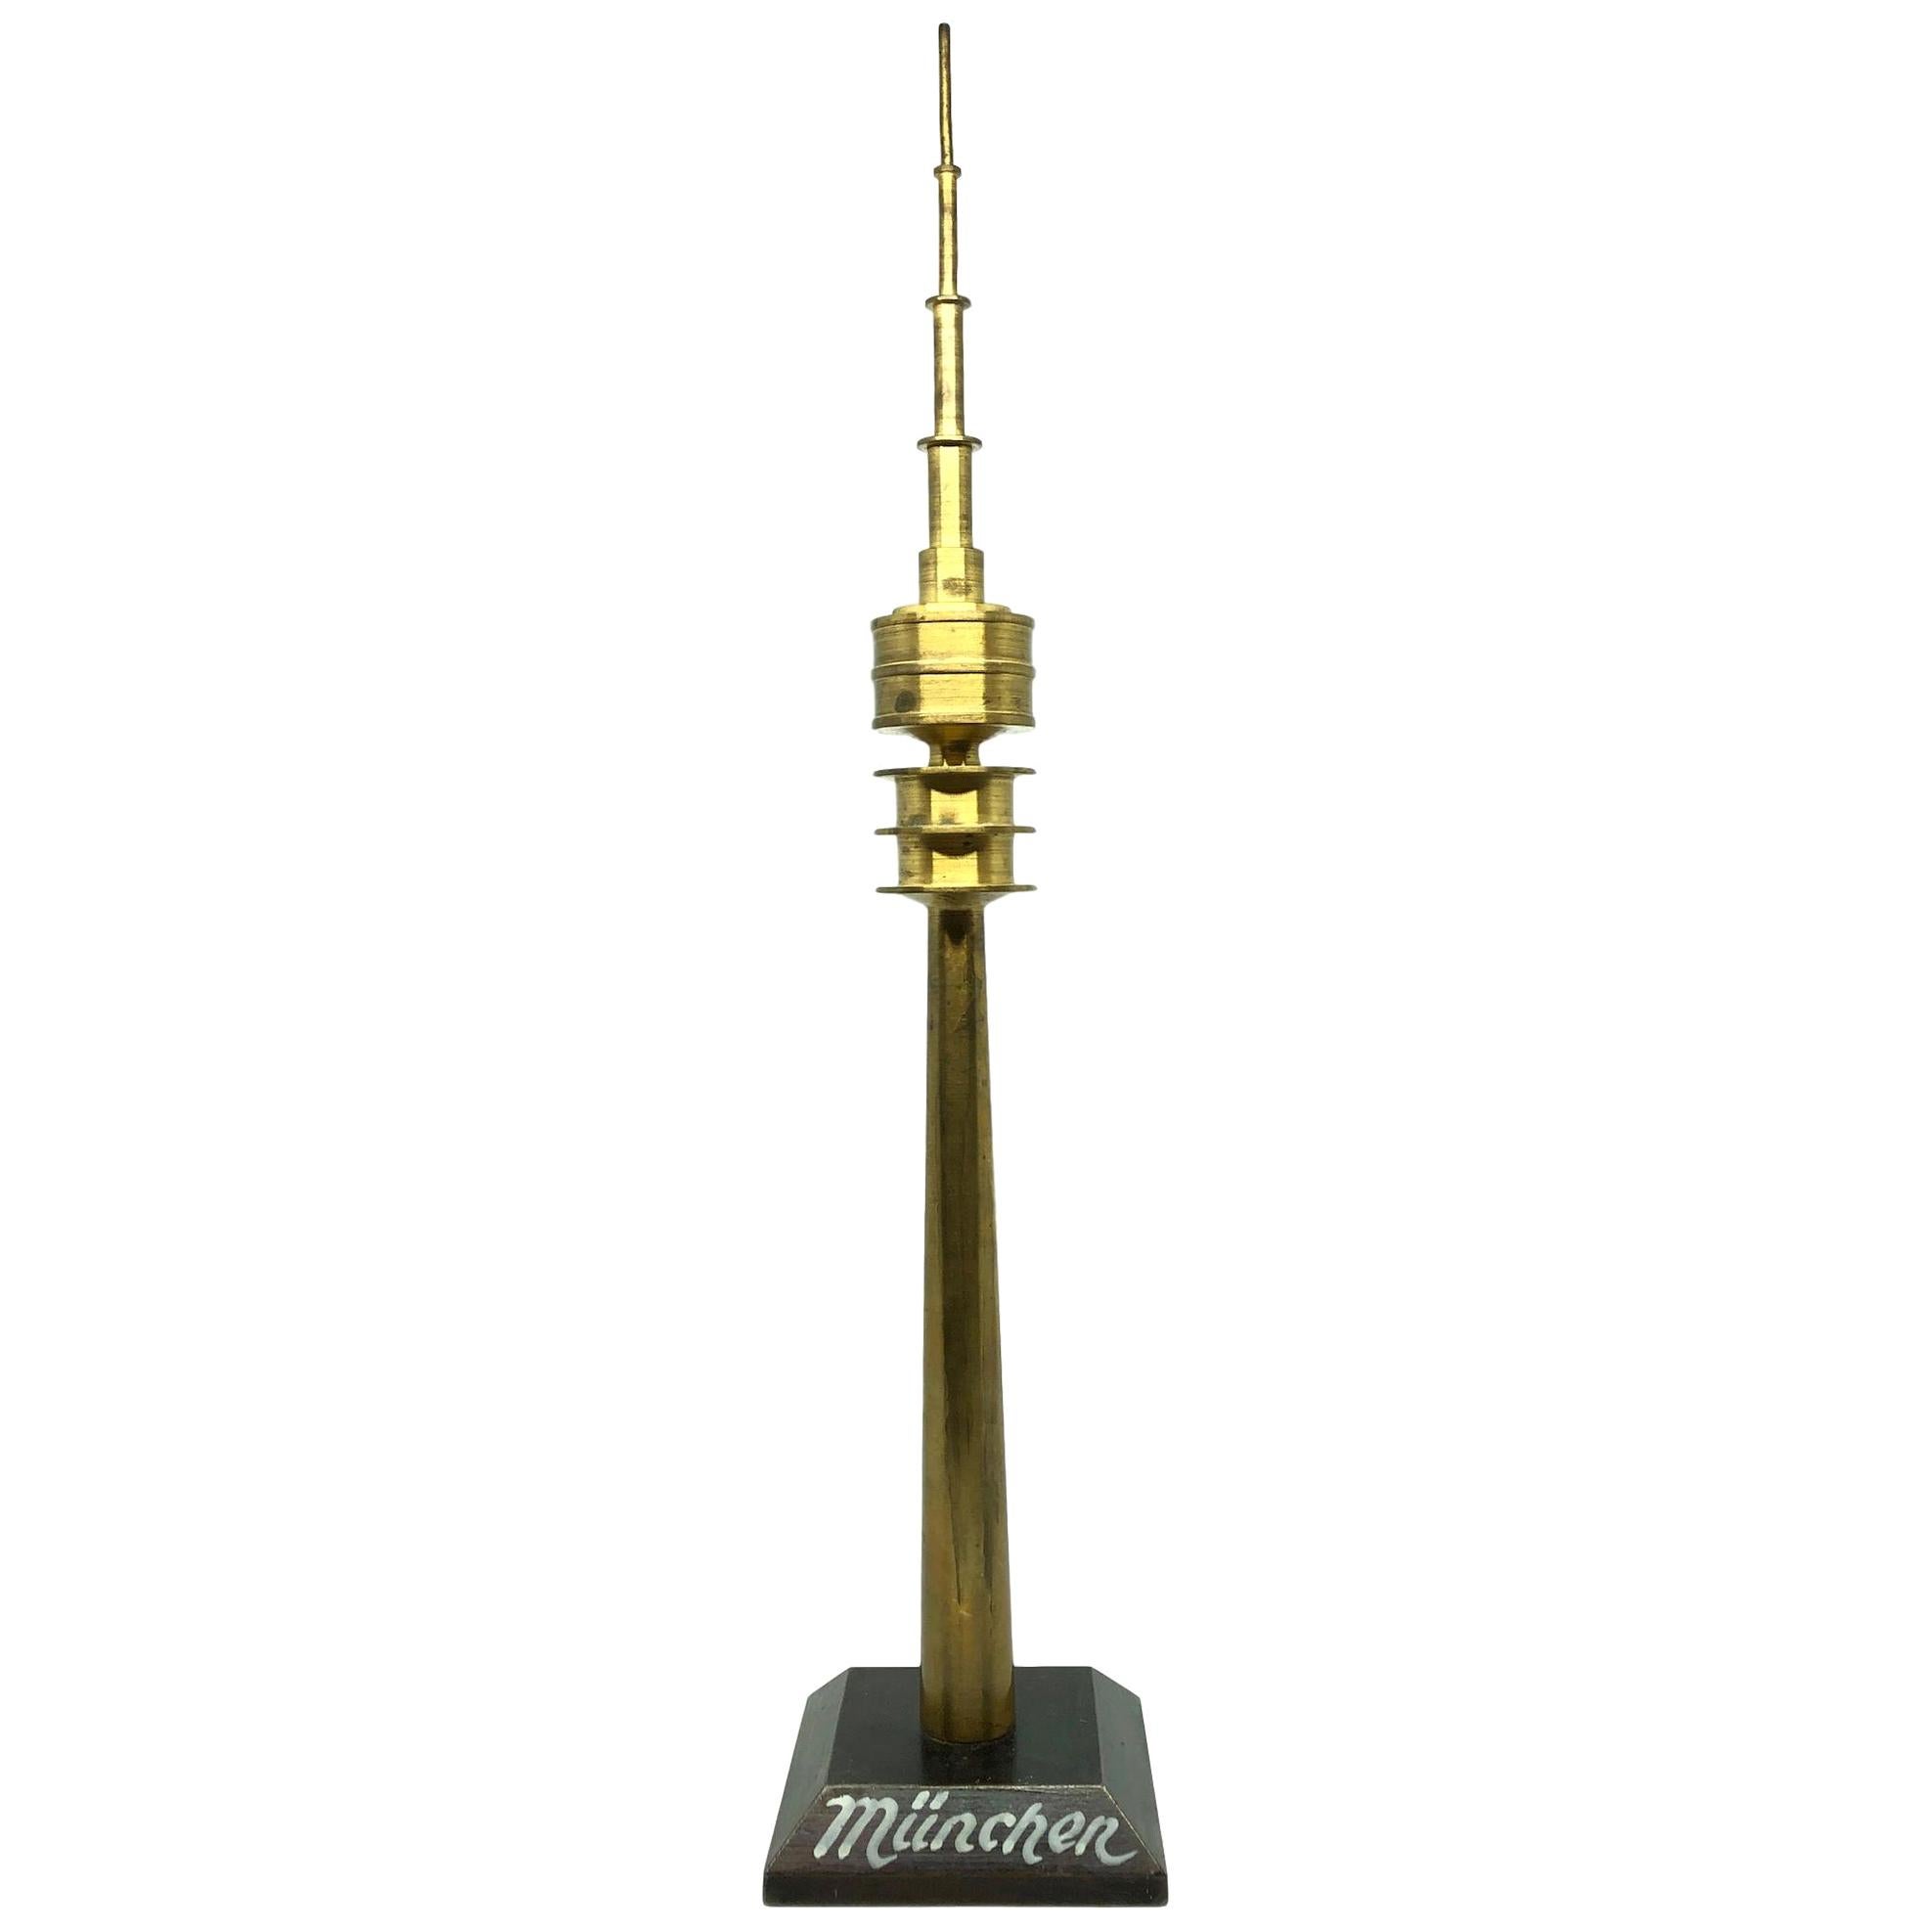 Stunning Brass Munich TV Television Tower Scale Design Model, 1970s For Sale